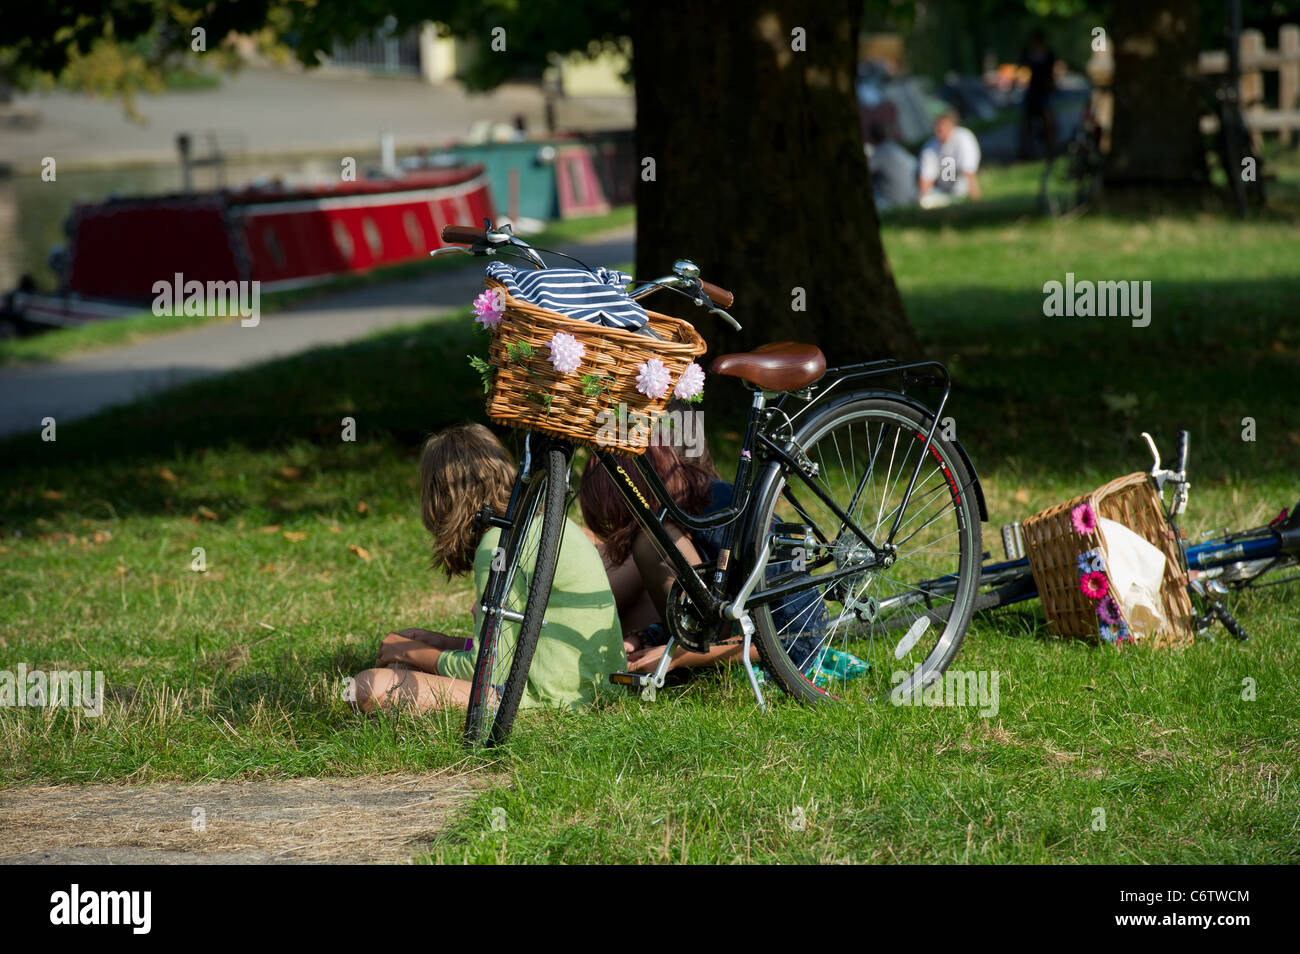 Beside the River Cam, in Cambridge, an old fashioned bicycle with basket on front decorated with flowers. Stock Photo